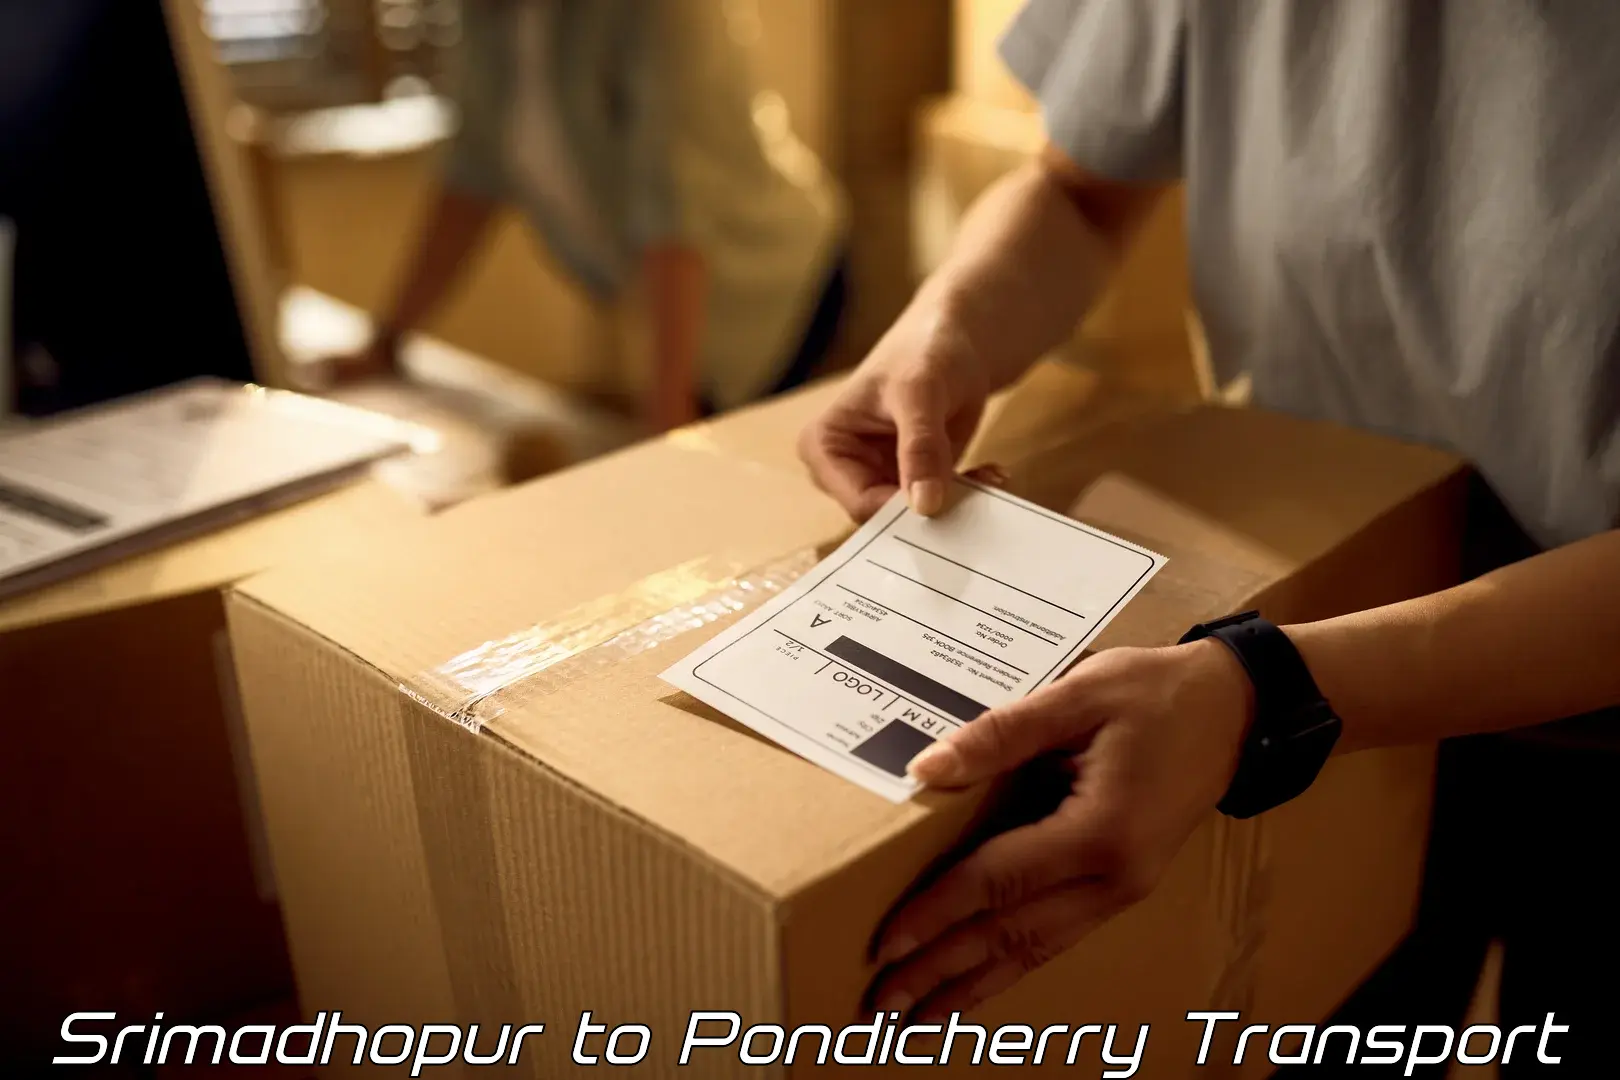 Parcel transport services Srimadhopur to Metttupalayam